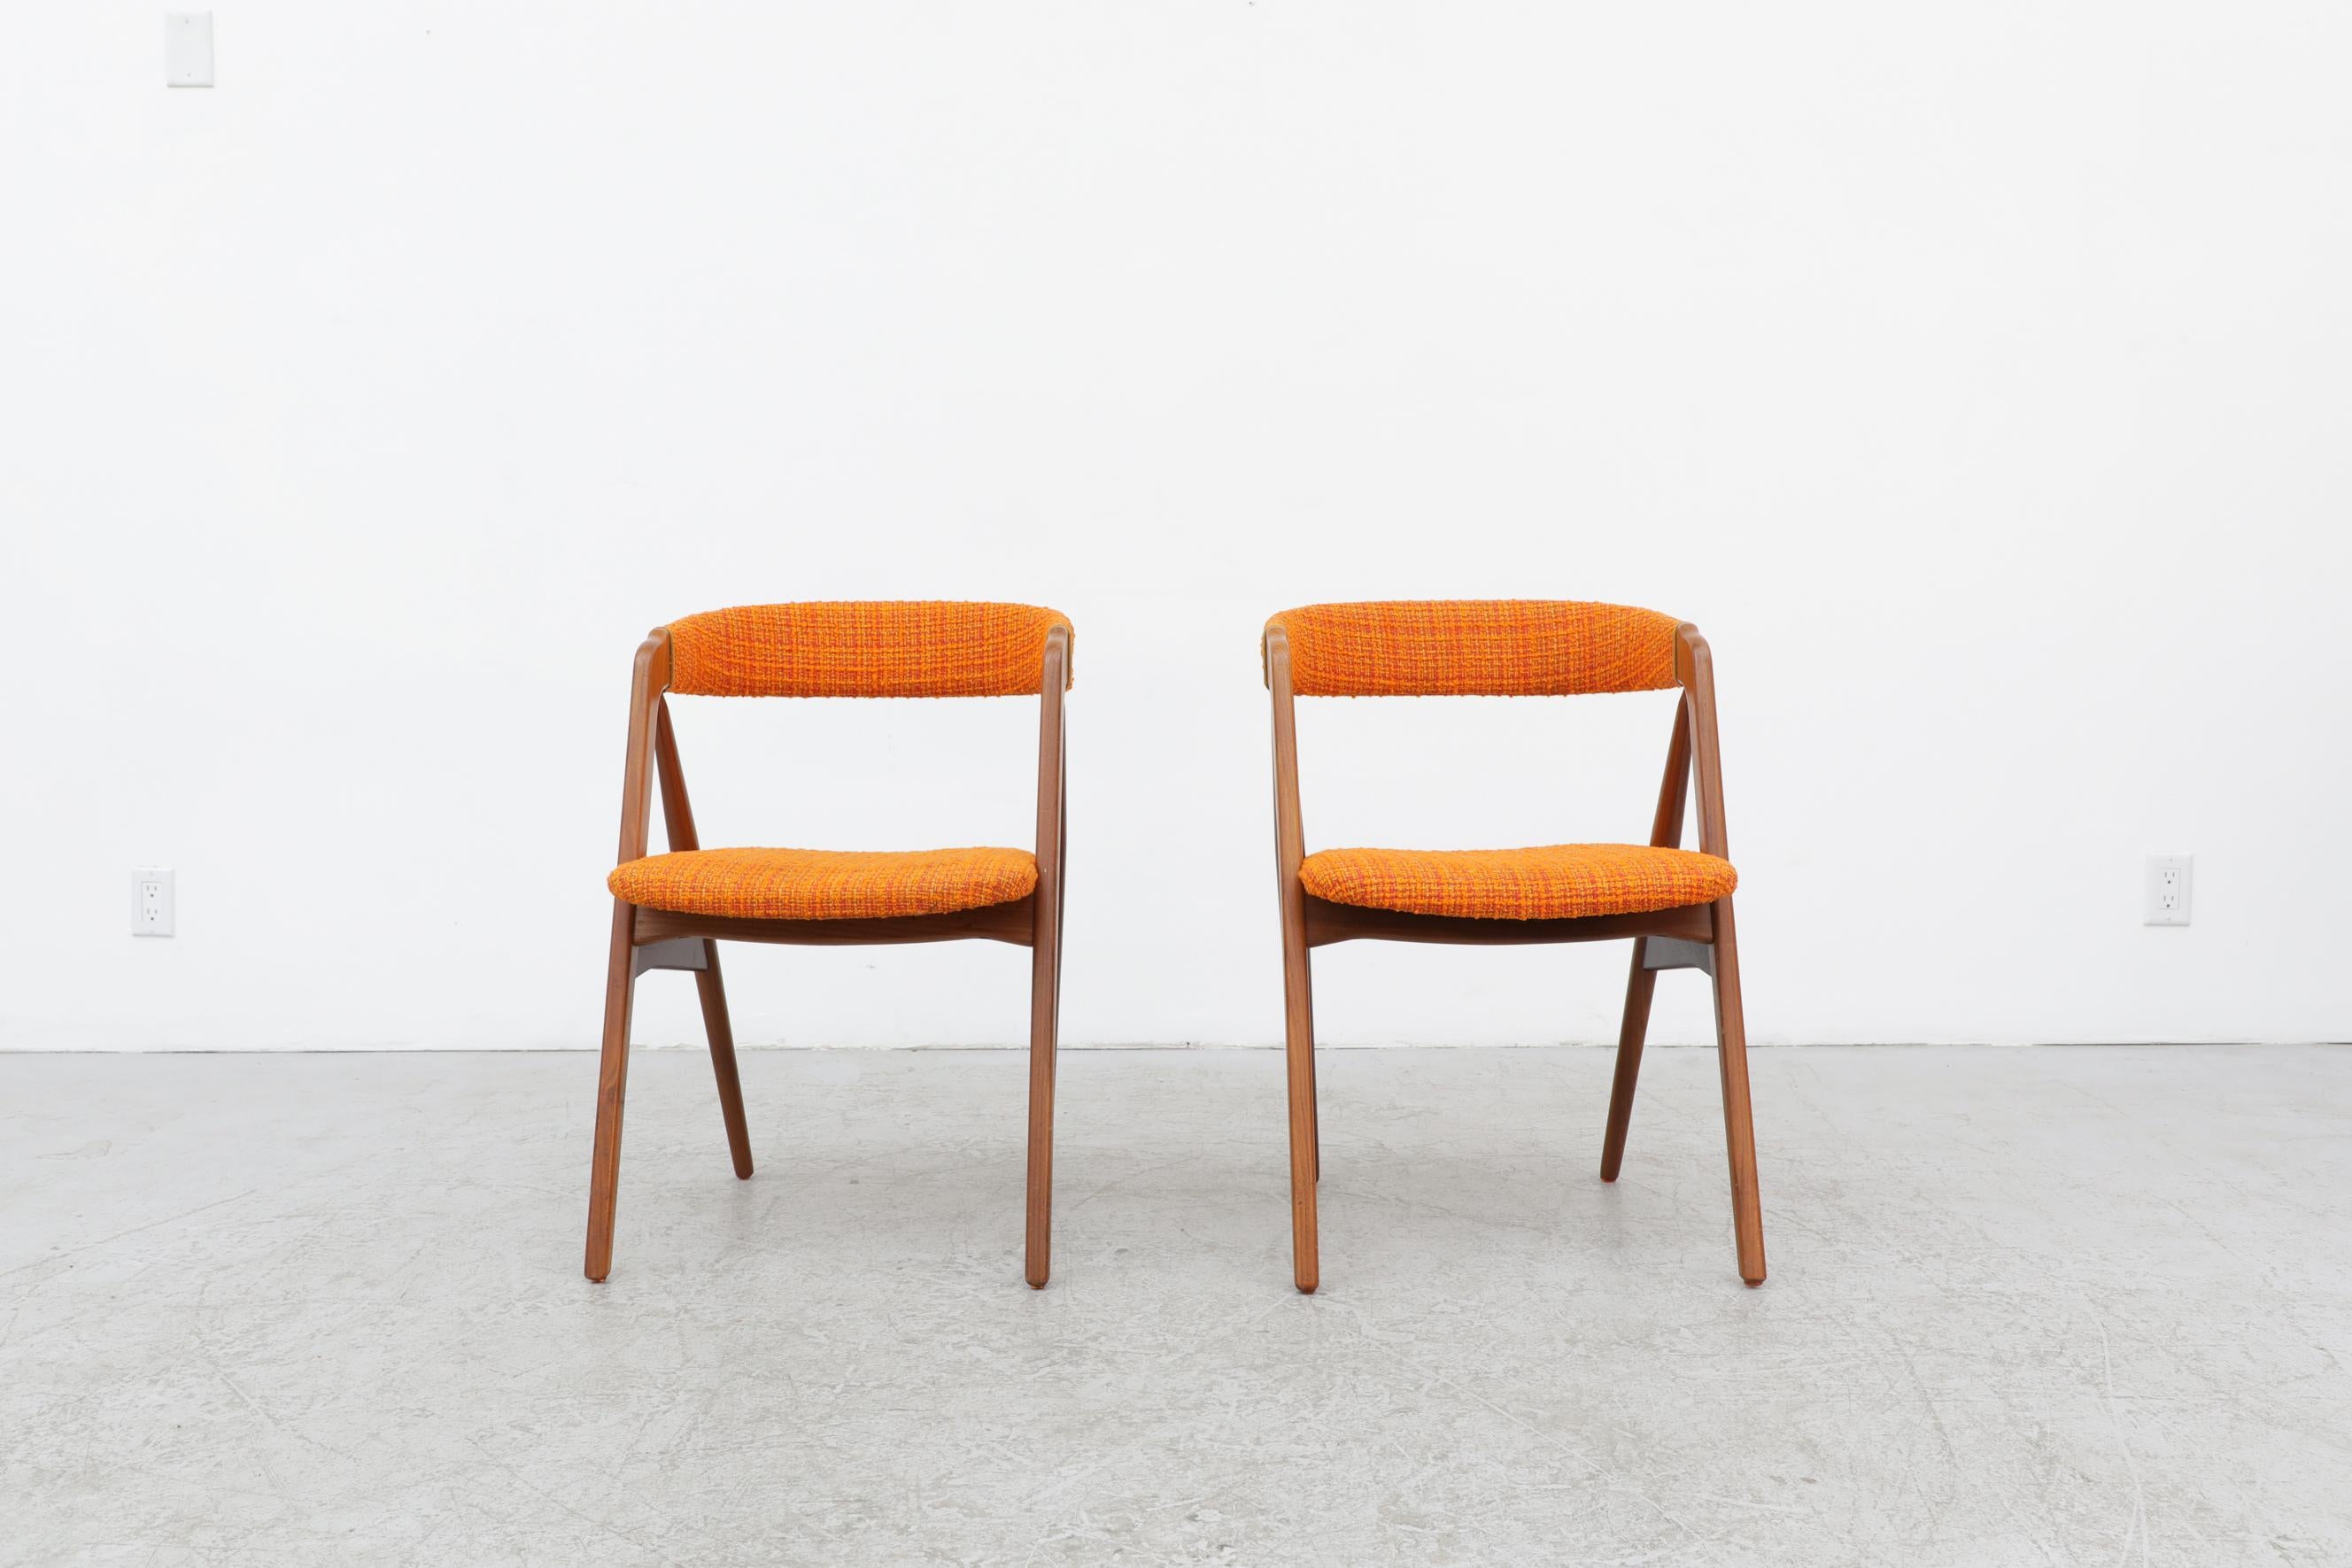 Pair of Kai Kristiansen chairs with original orange boucle upholstered seats. In original condition with visible scuffs and patina. Wear is consistent with their age and use.